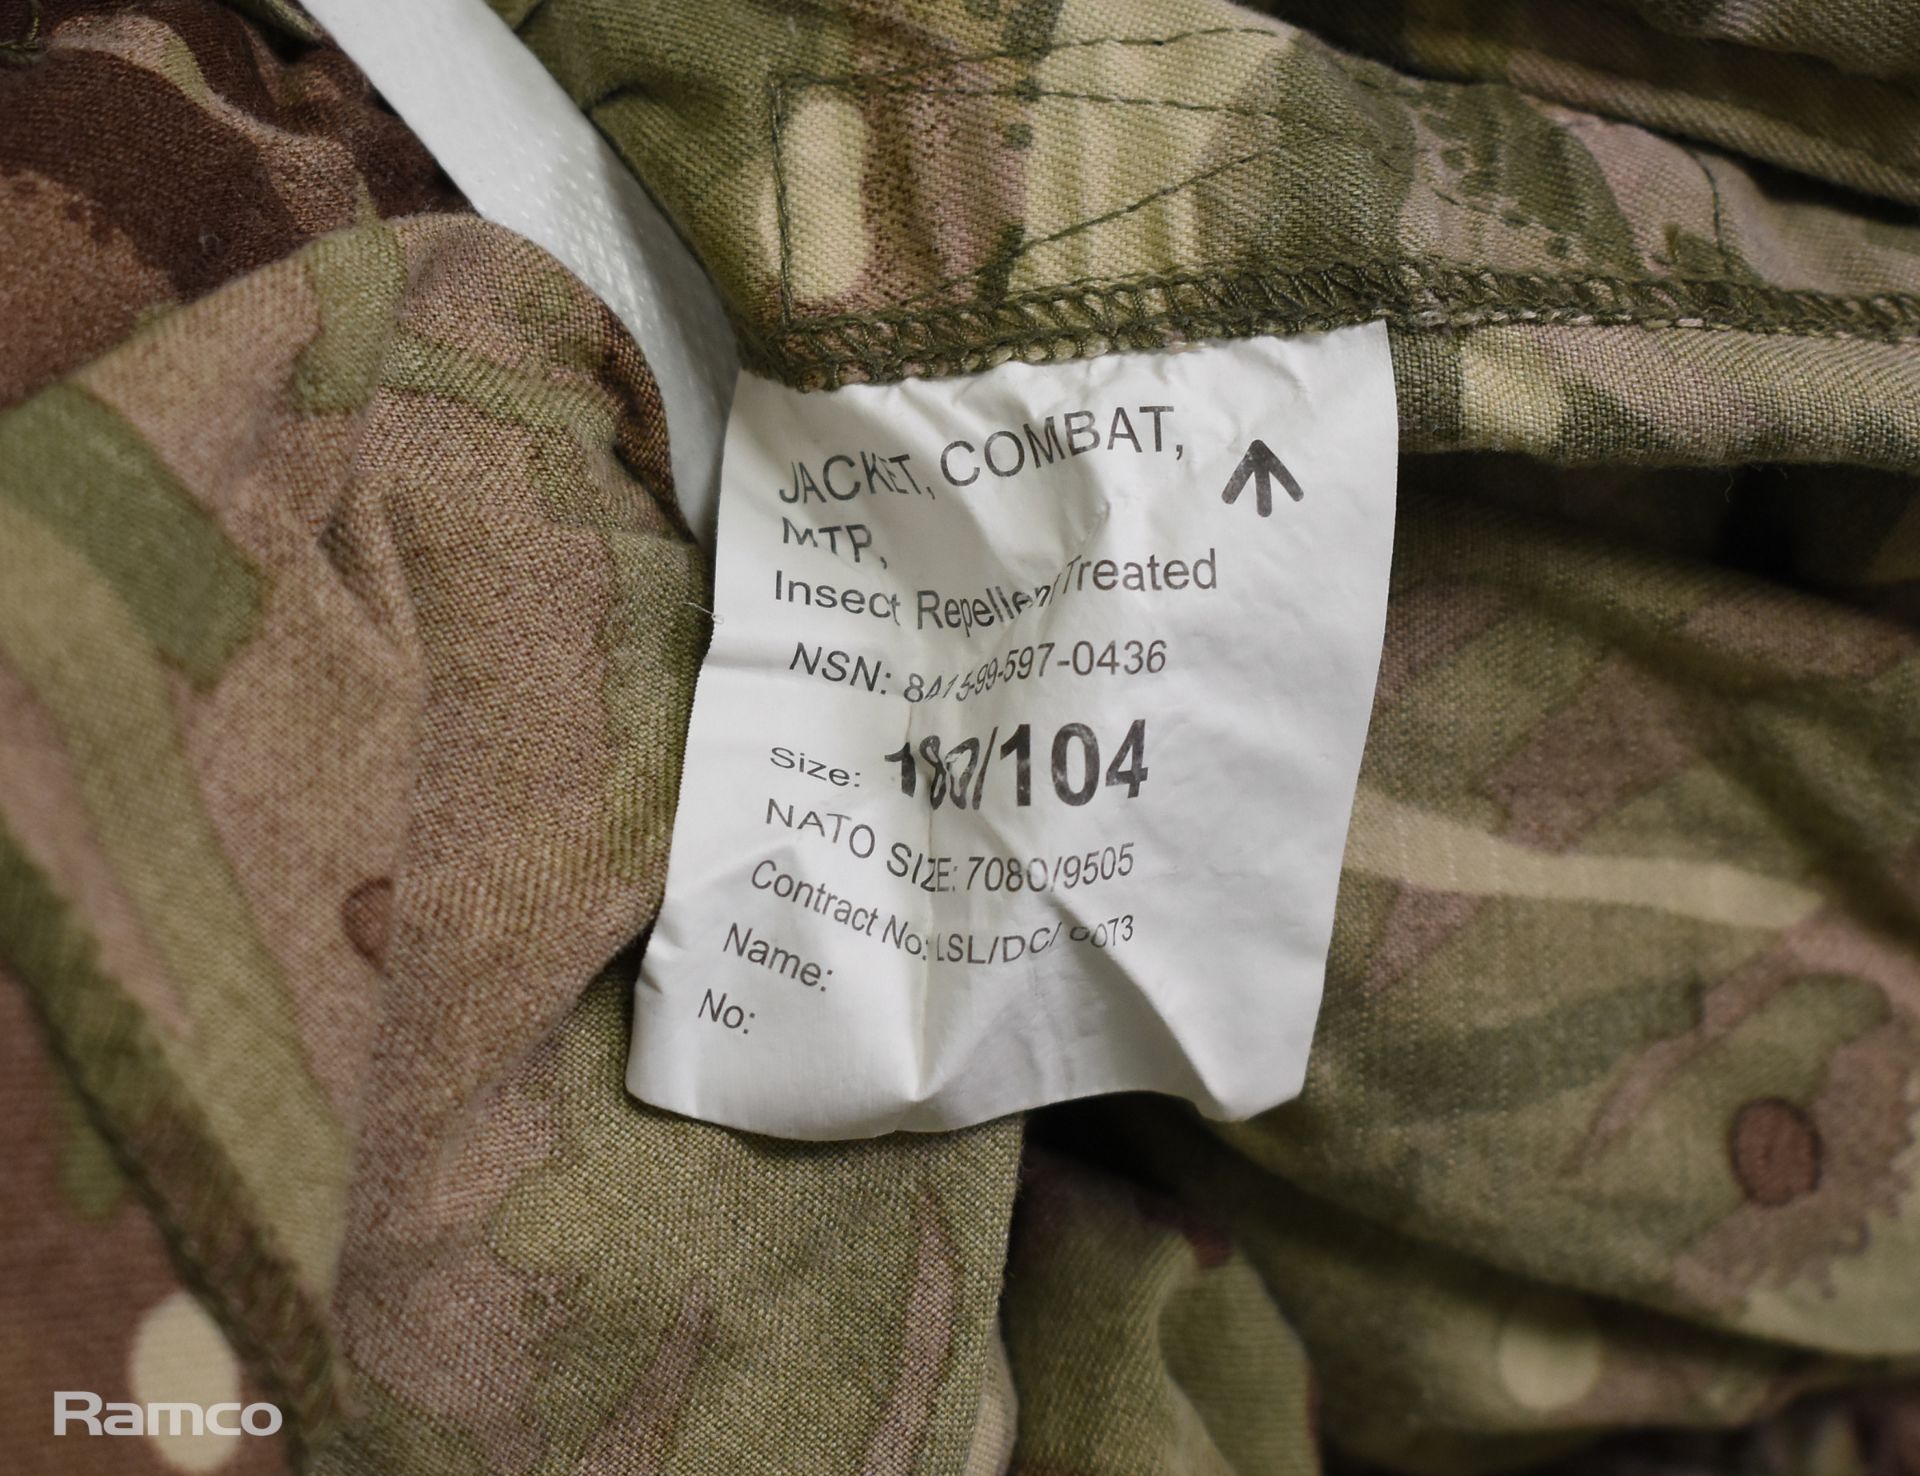 20x British Army MTP Combat jackets mixed styles - mixed grades and sizes - Image 9 of 12